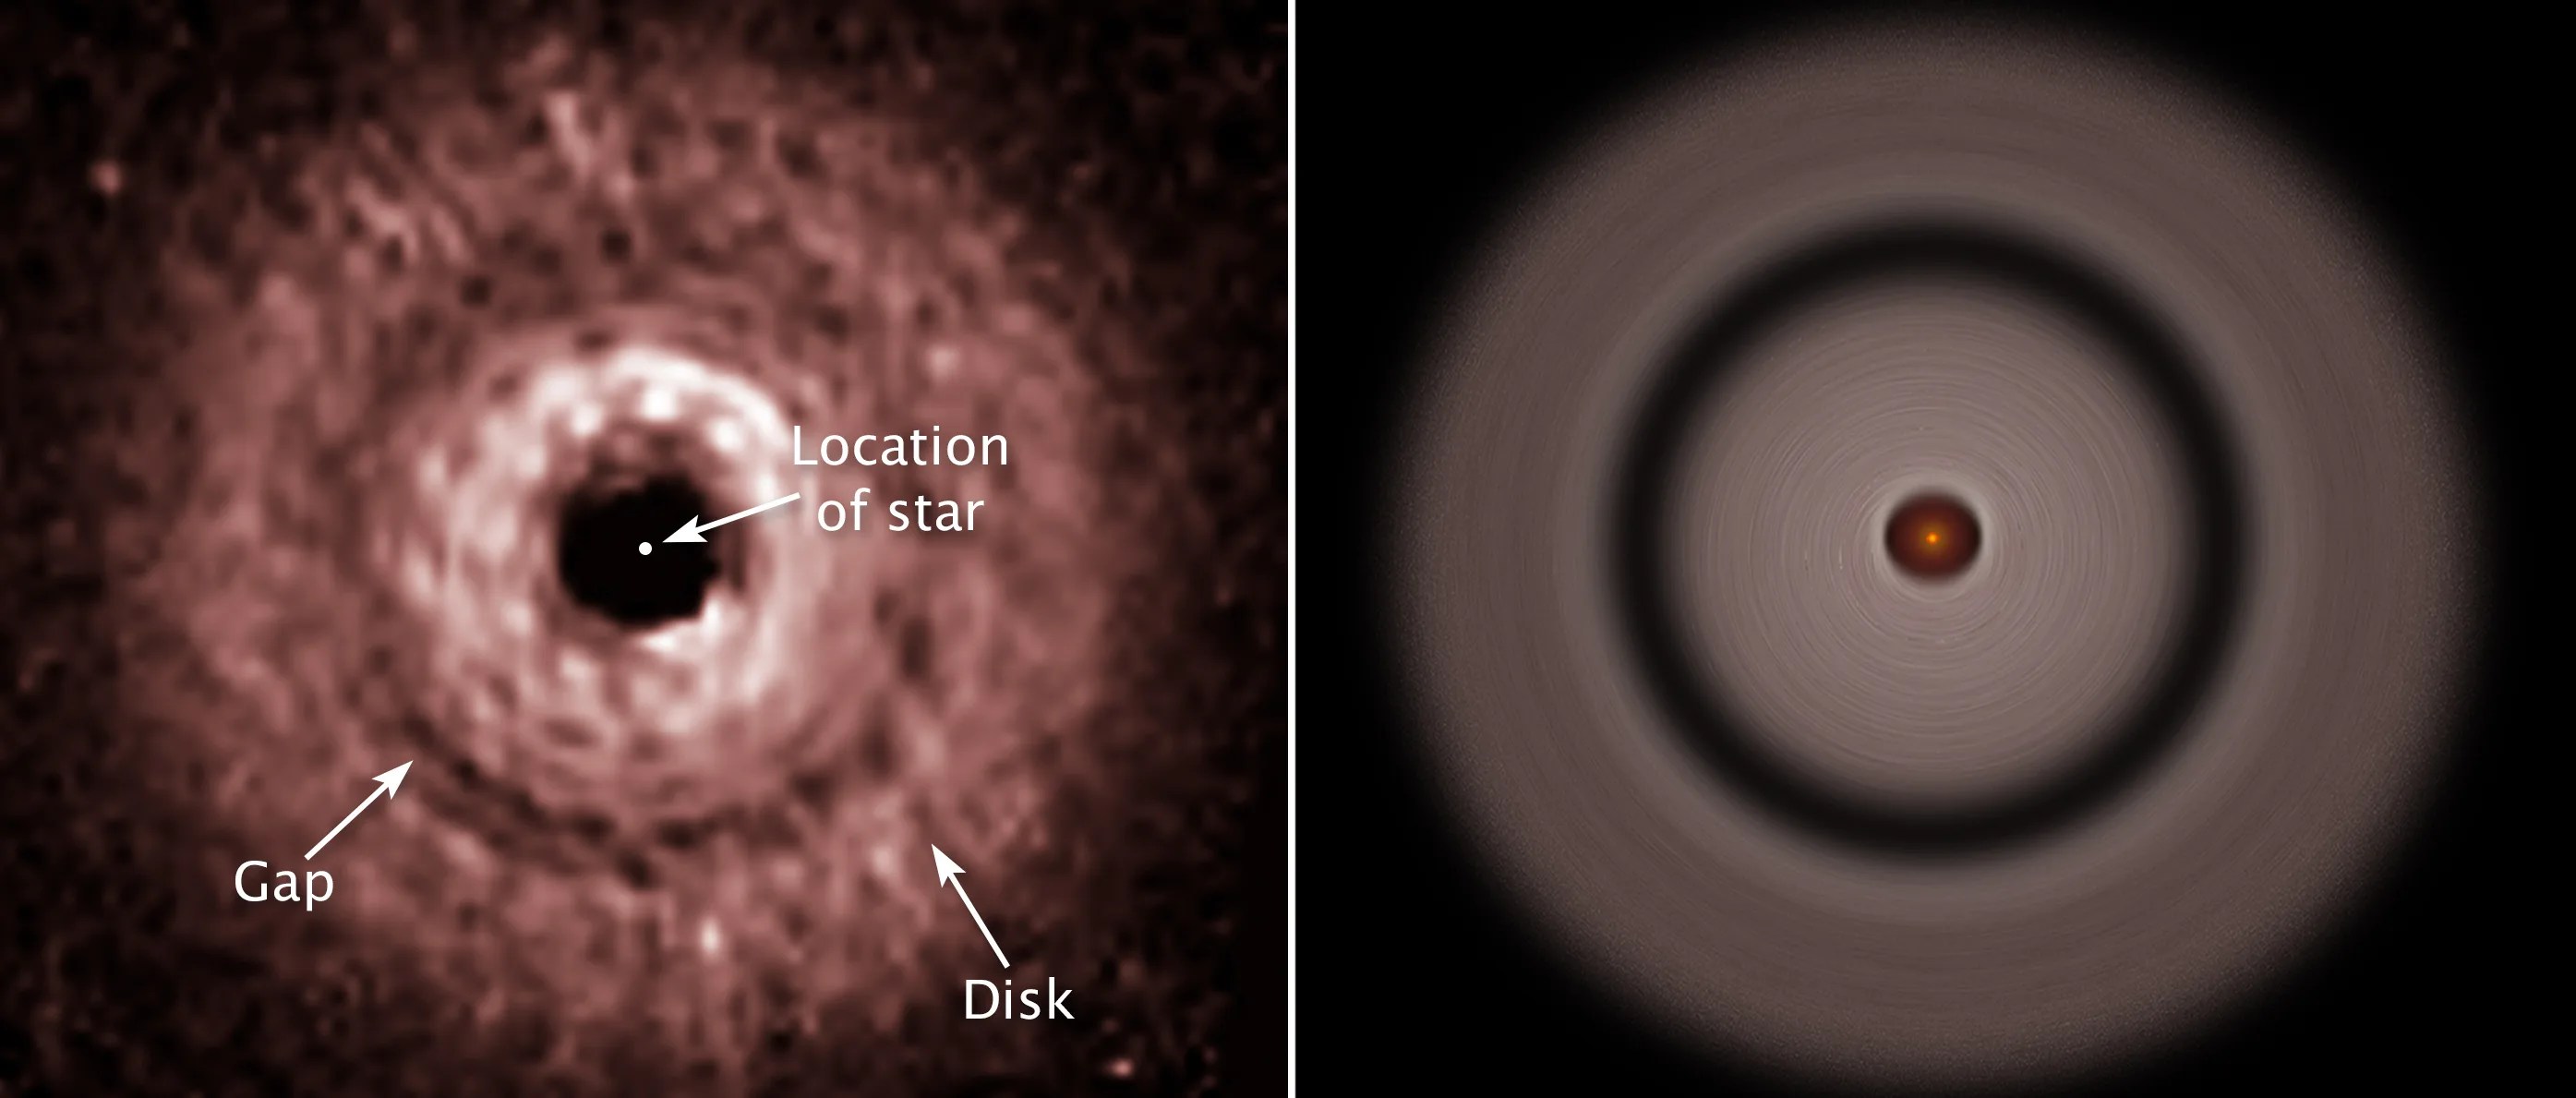 TW Hydrae Hubble observation (left) and illustration (right). Left: pinkish disk that is black at its center, a lighter pink around the center. A darker pink ring midway through the disk. Right: illustration outlining features in the observation.